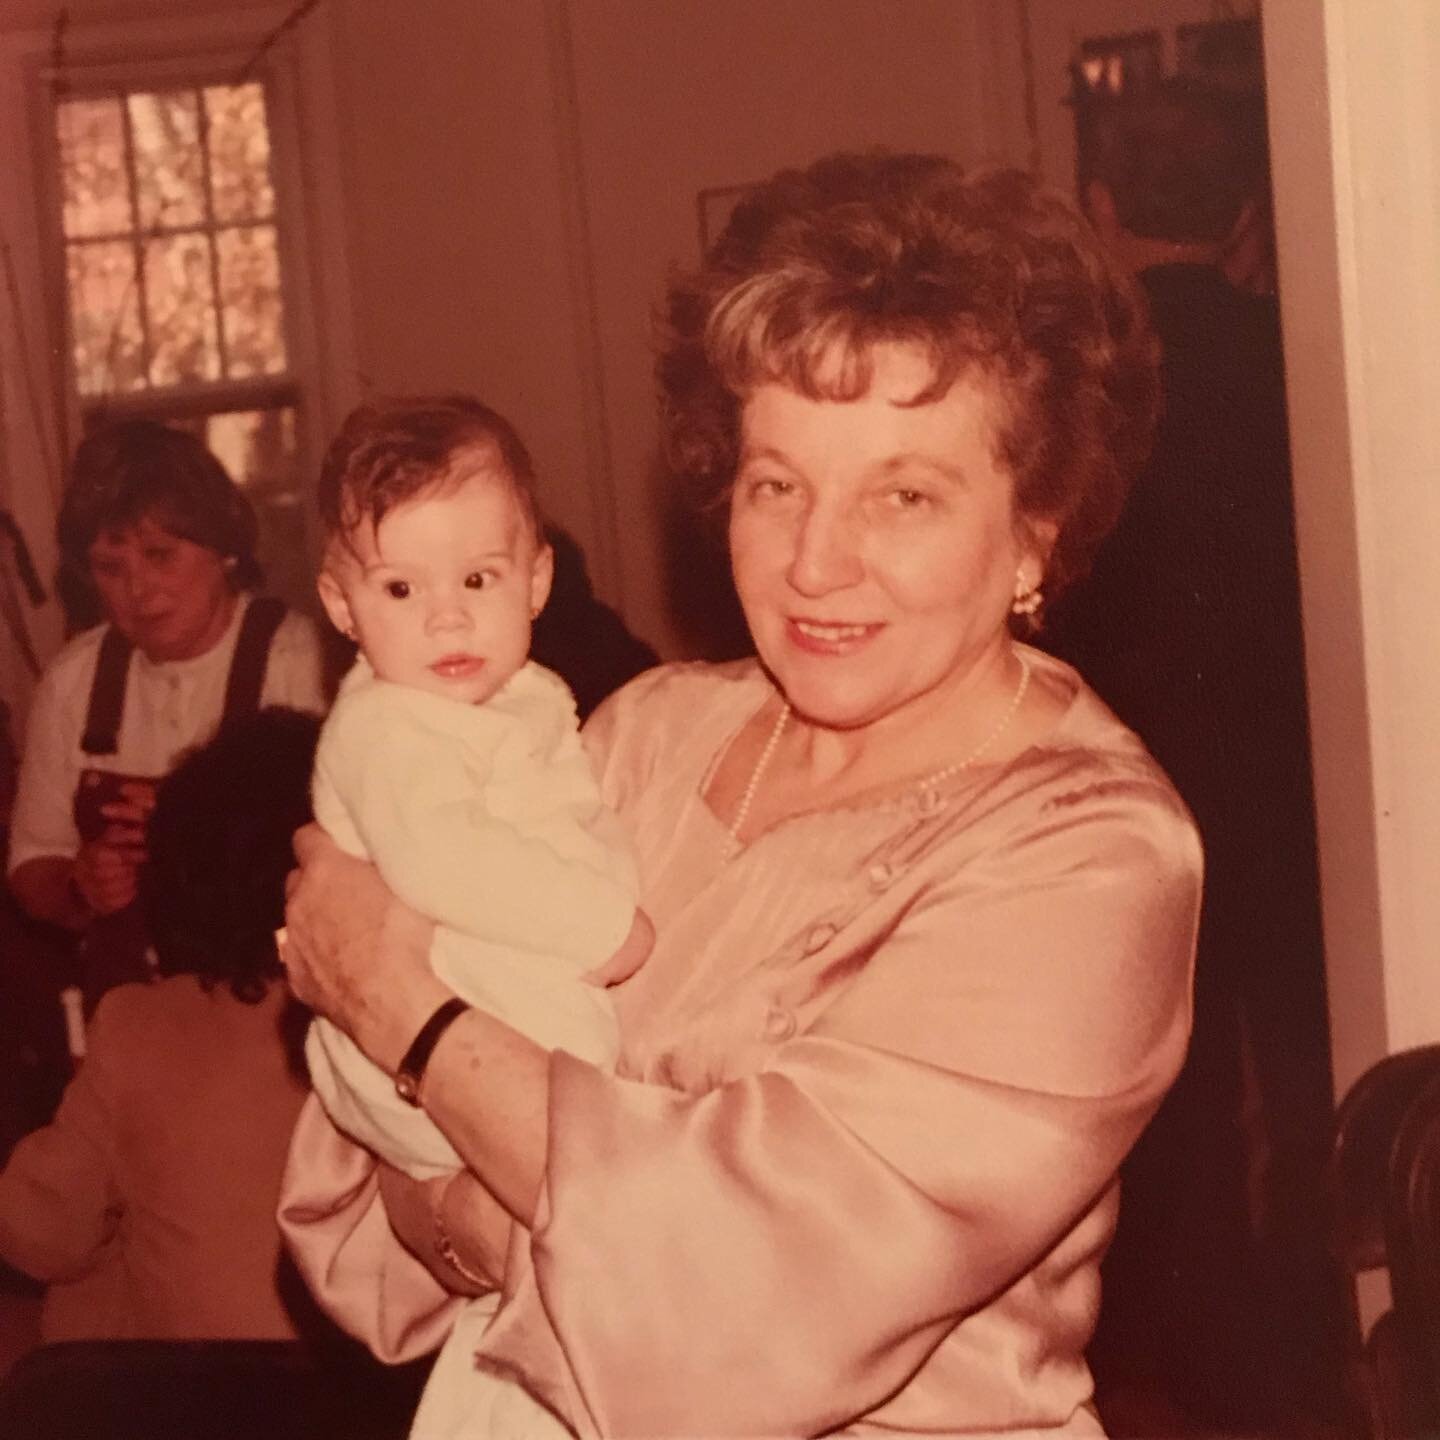 Happy 100th birthday grandma!!! We love you and miss you! Here she is holding me as a baby. We are giving my daughter the middle name Veronika in her honor. #anyukafilm